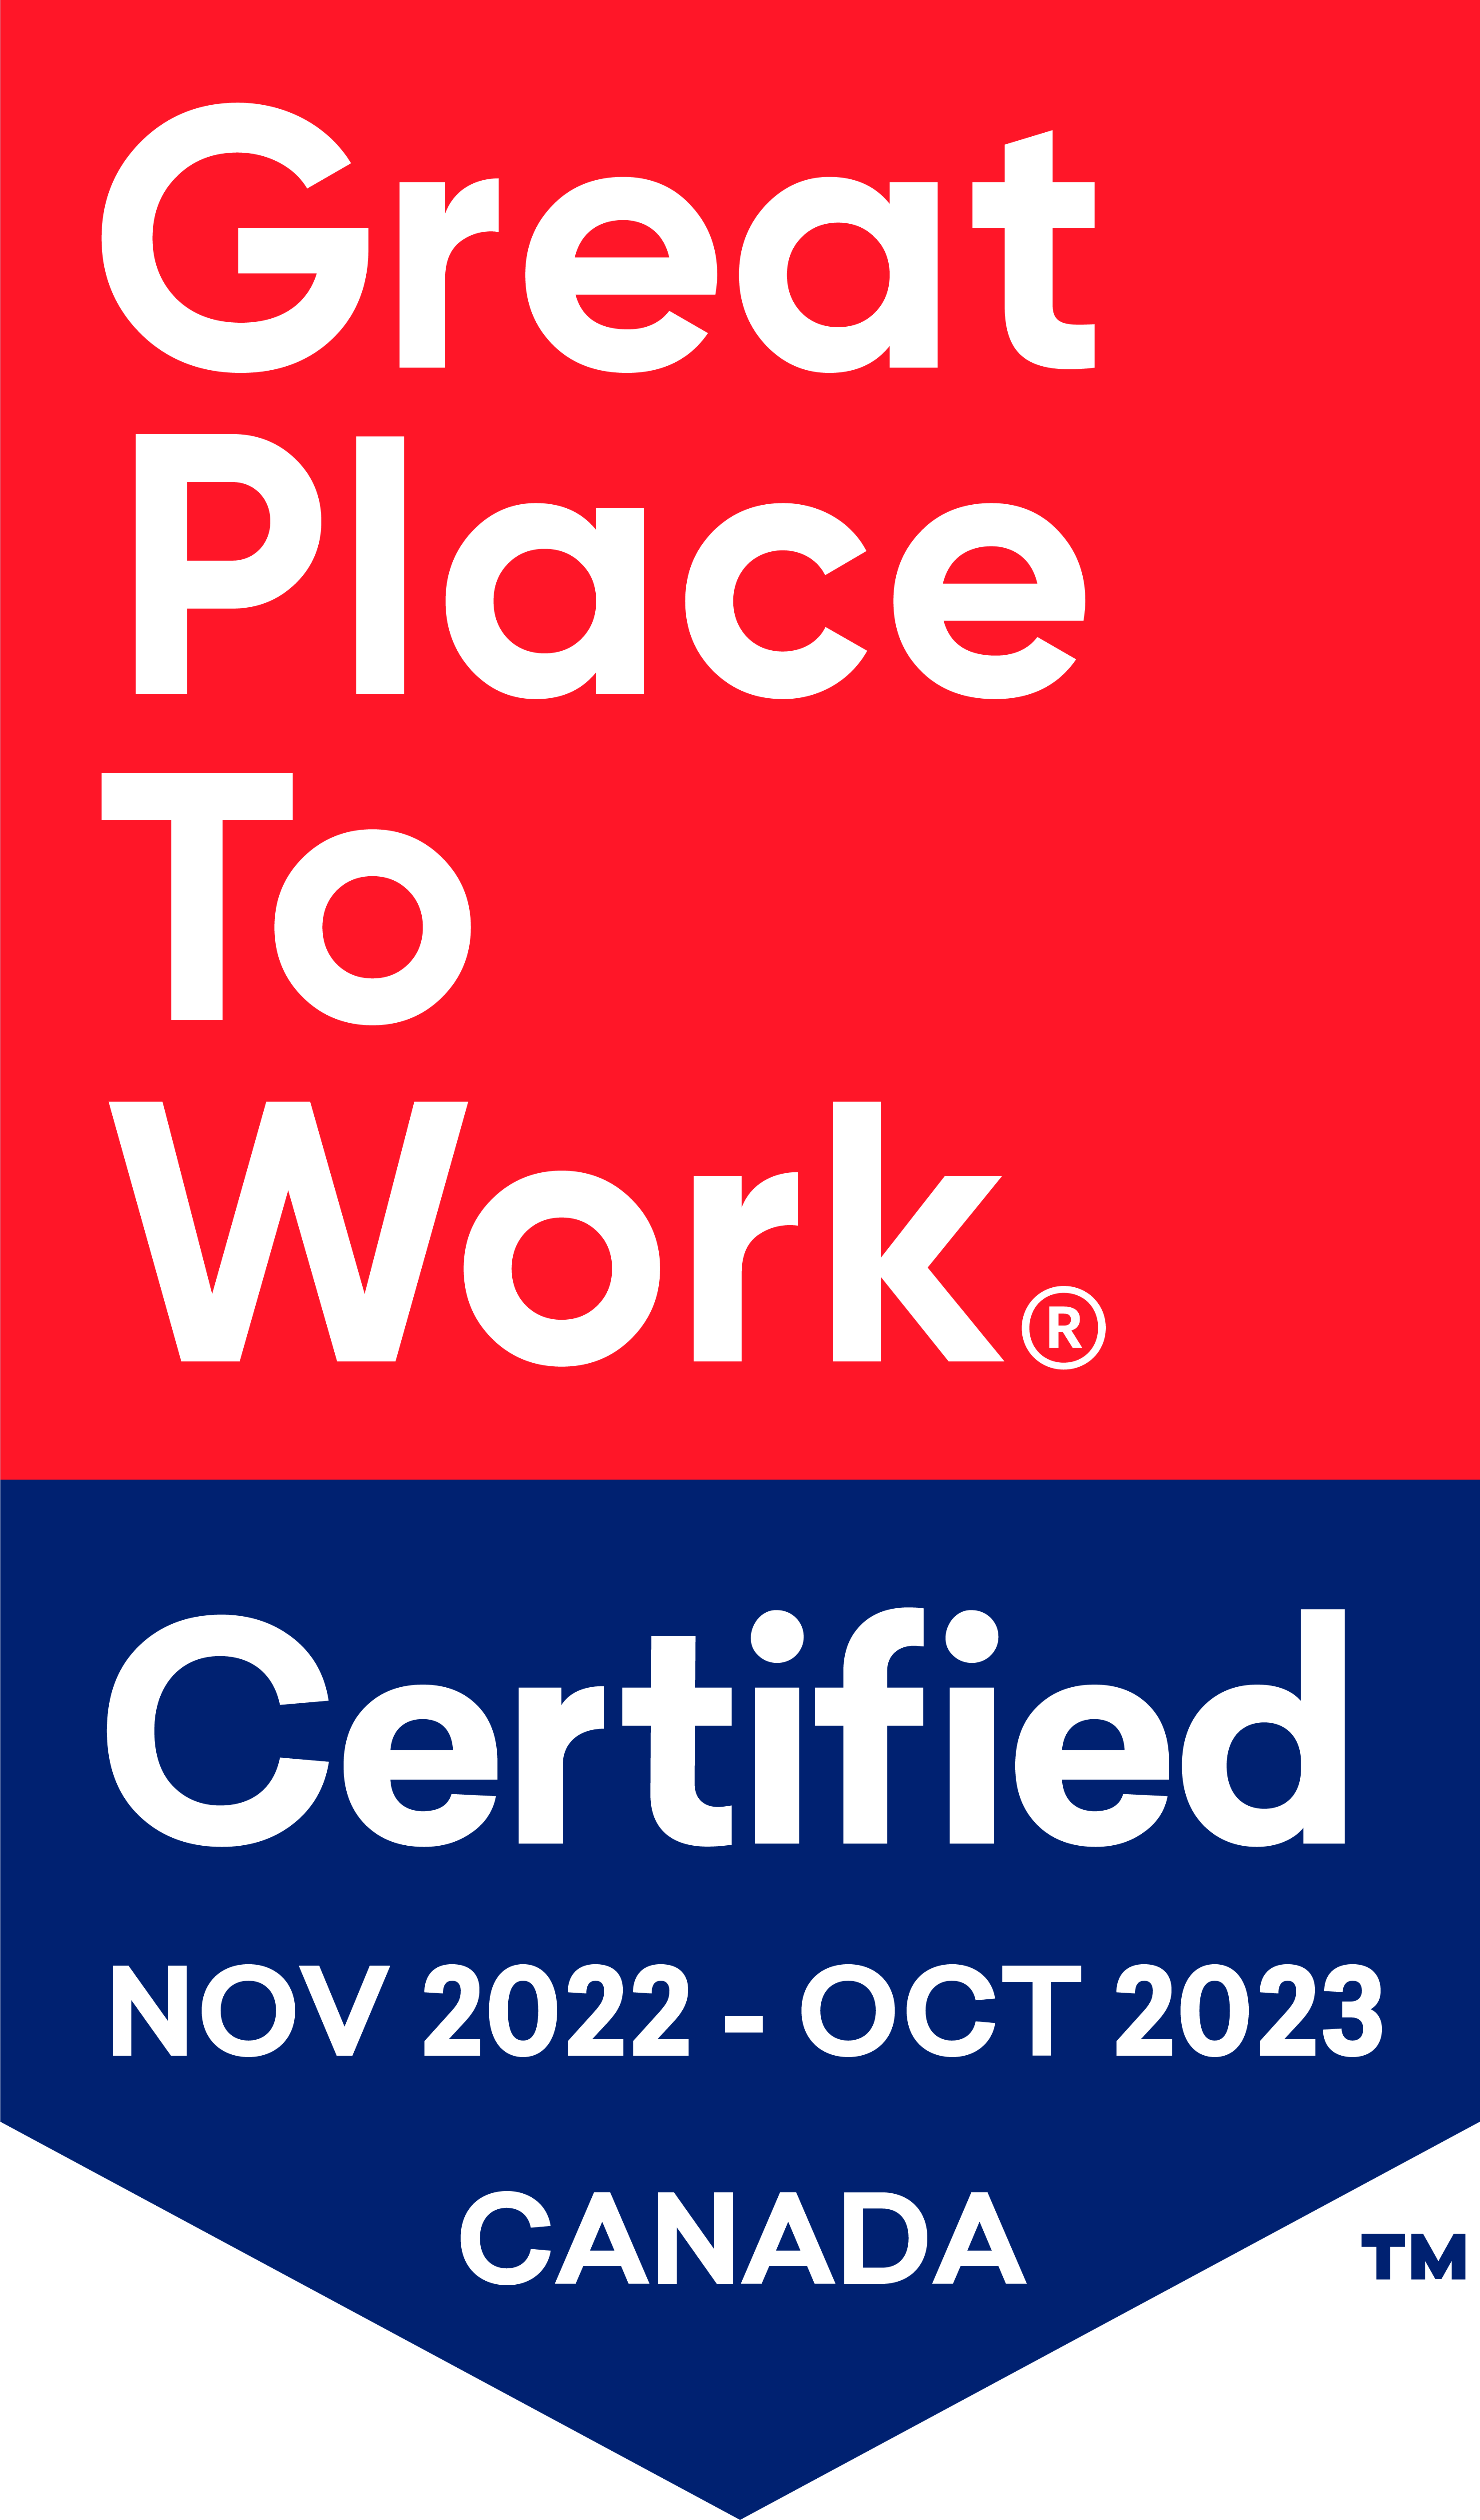 Certification badge for great places to work November 2022